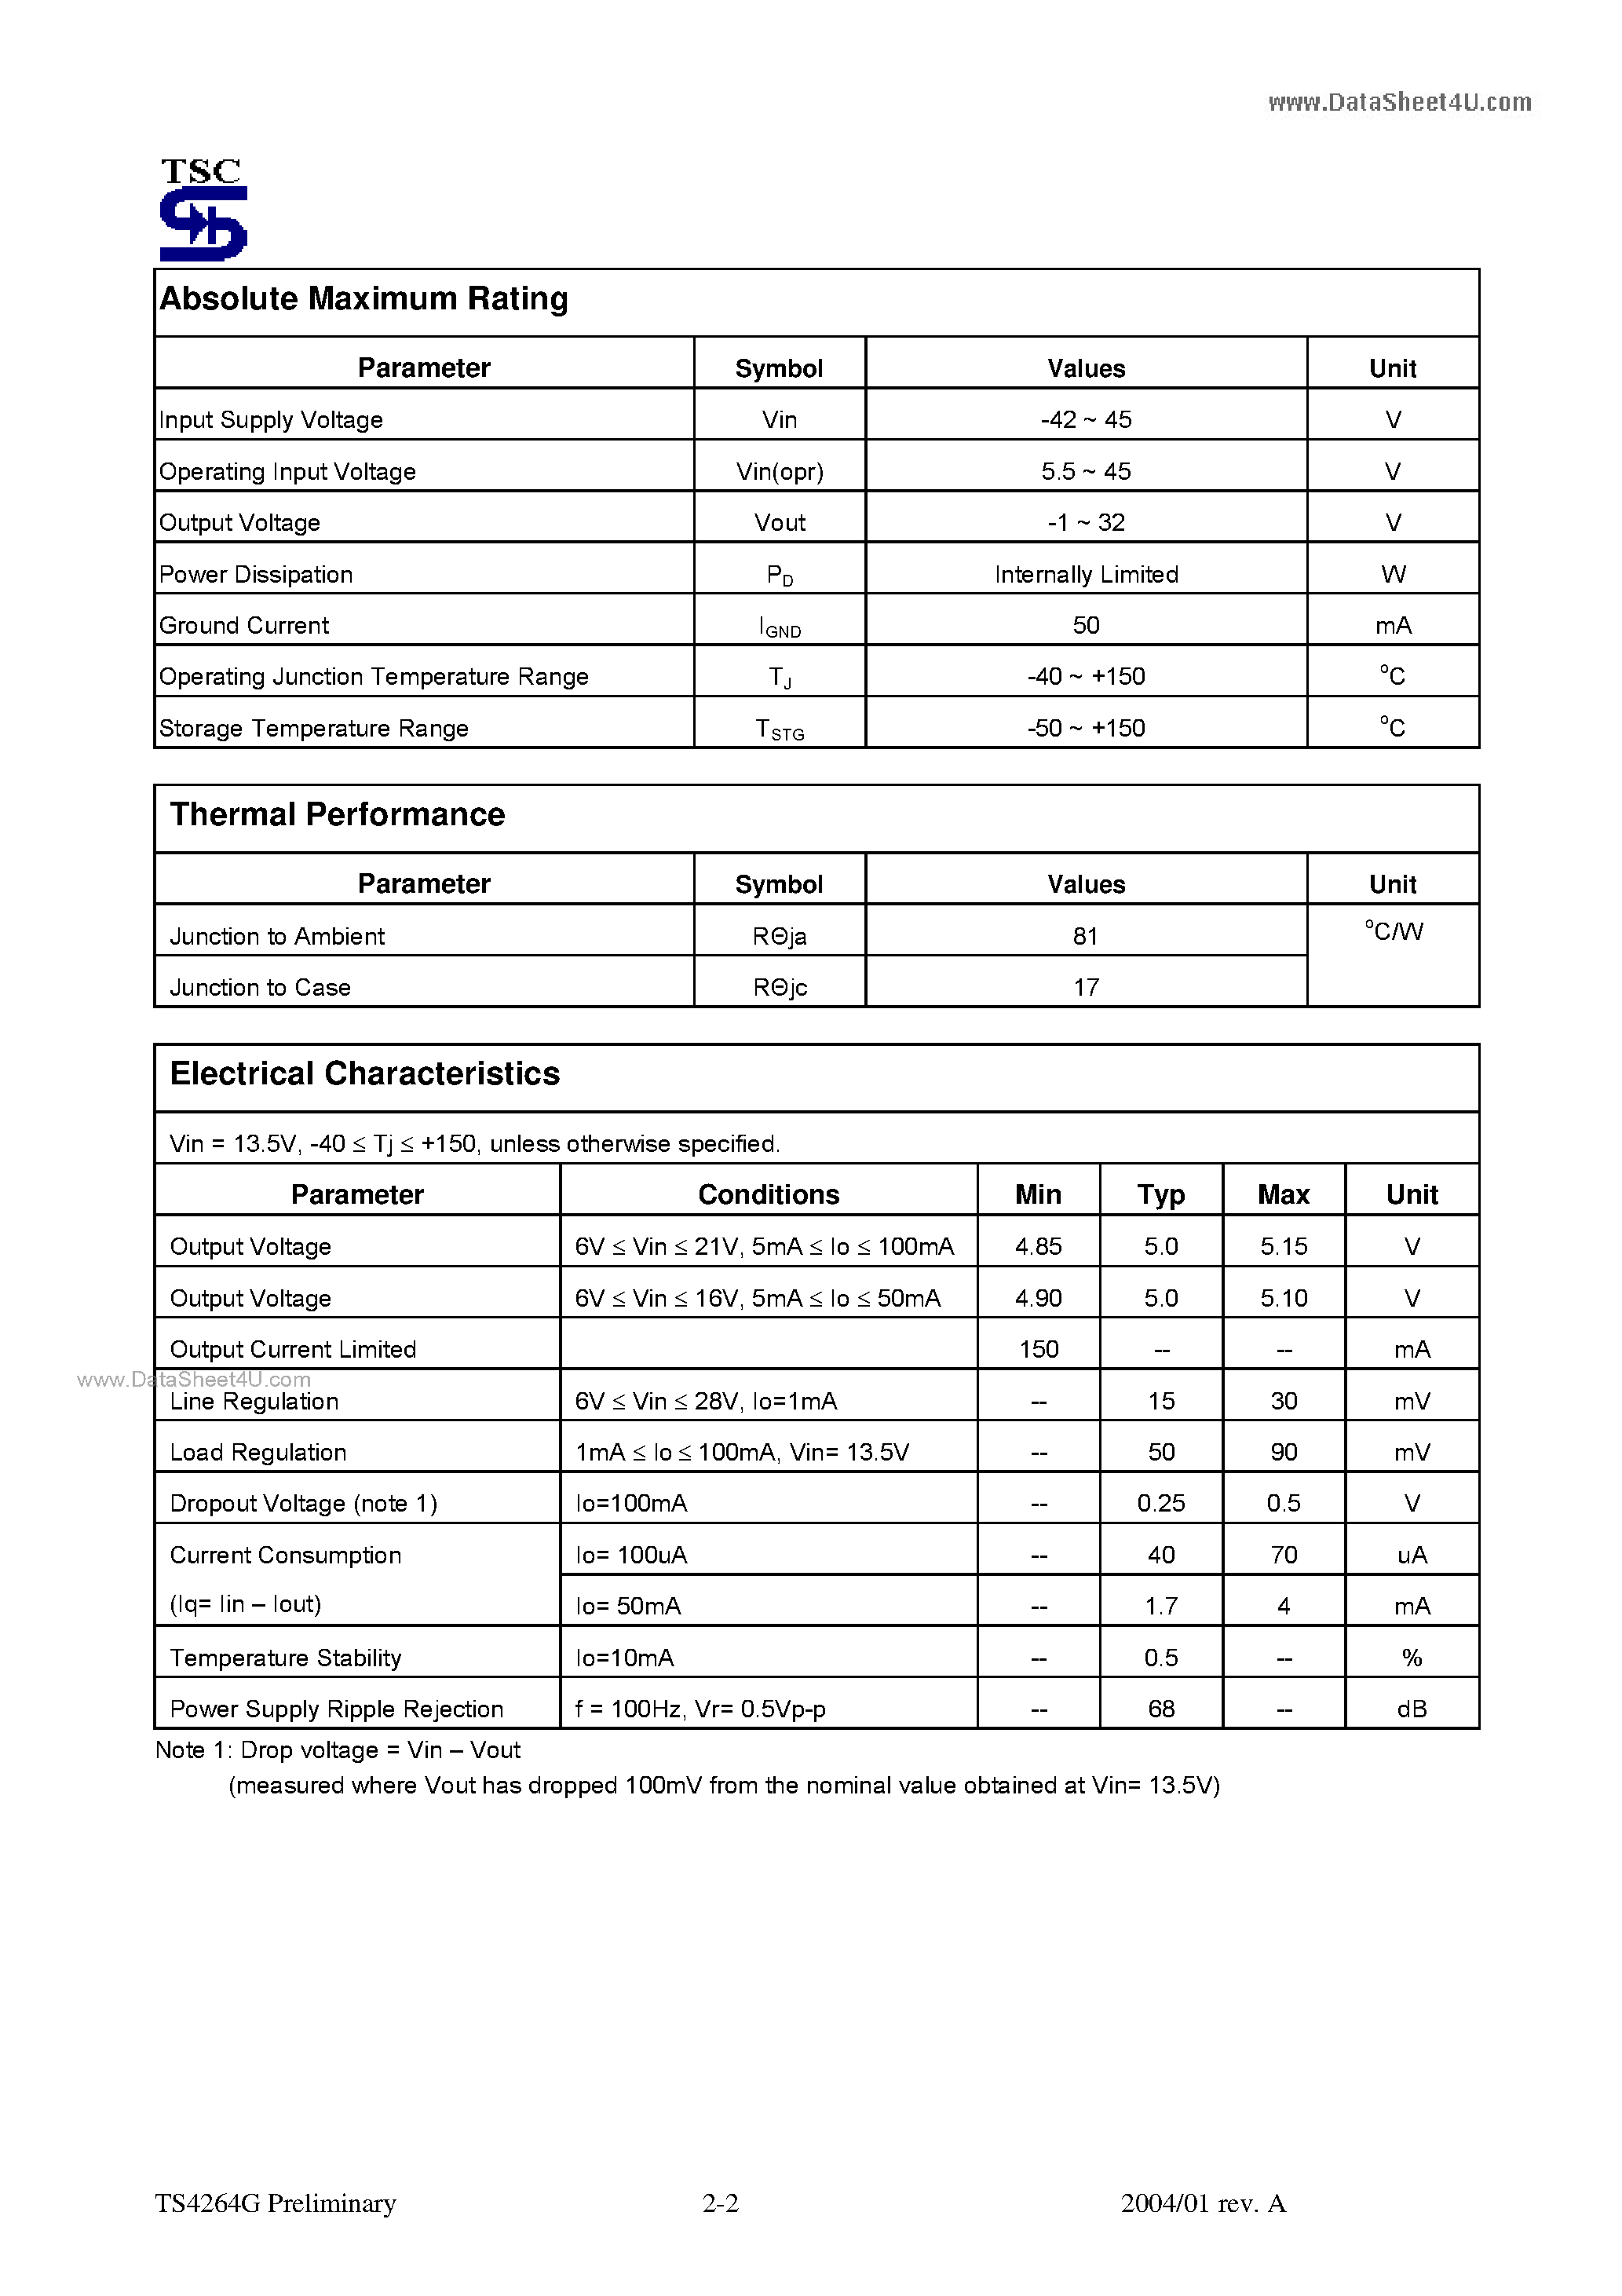 Datasheet TS4264G - 150mA Ultra Low Drop Out Voltage Regulator page 2